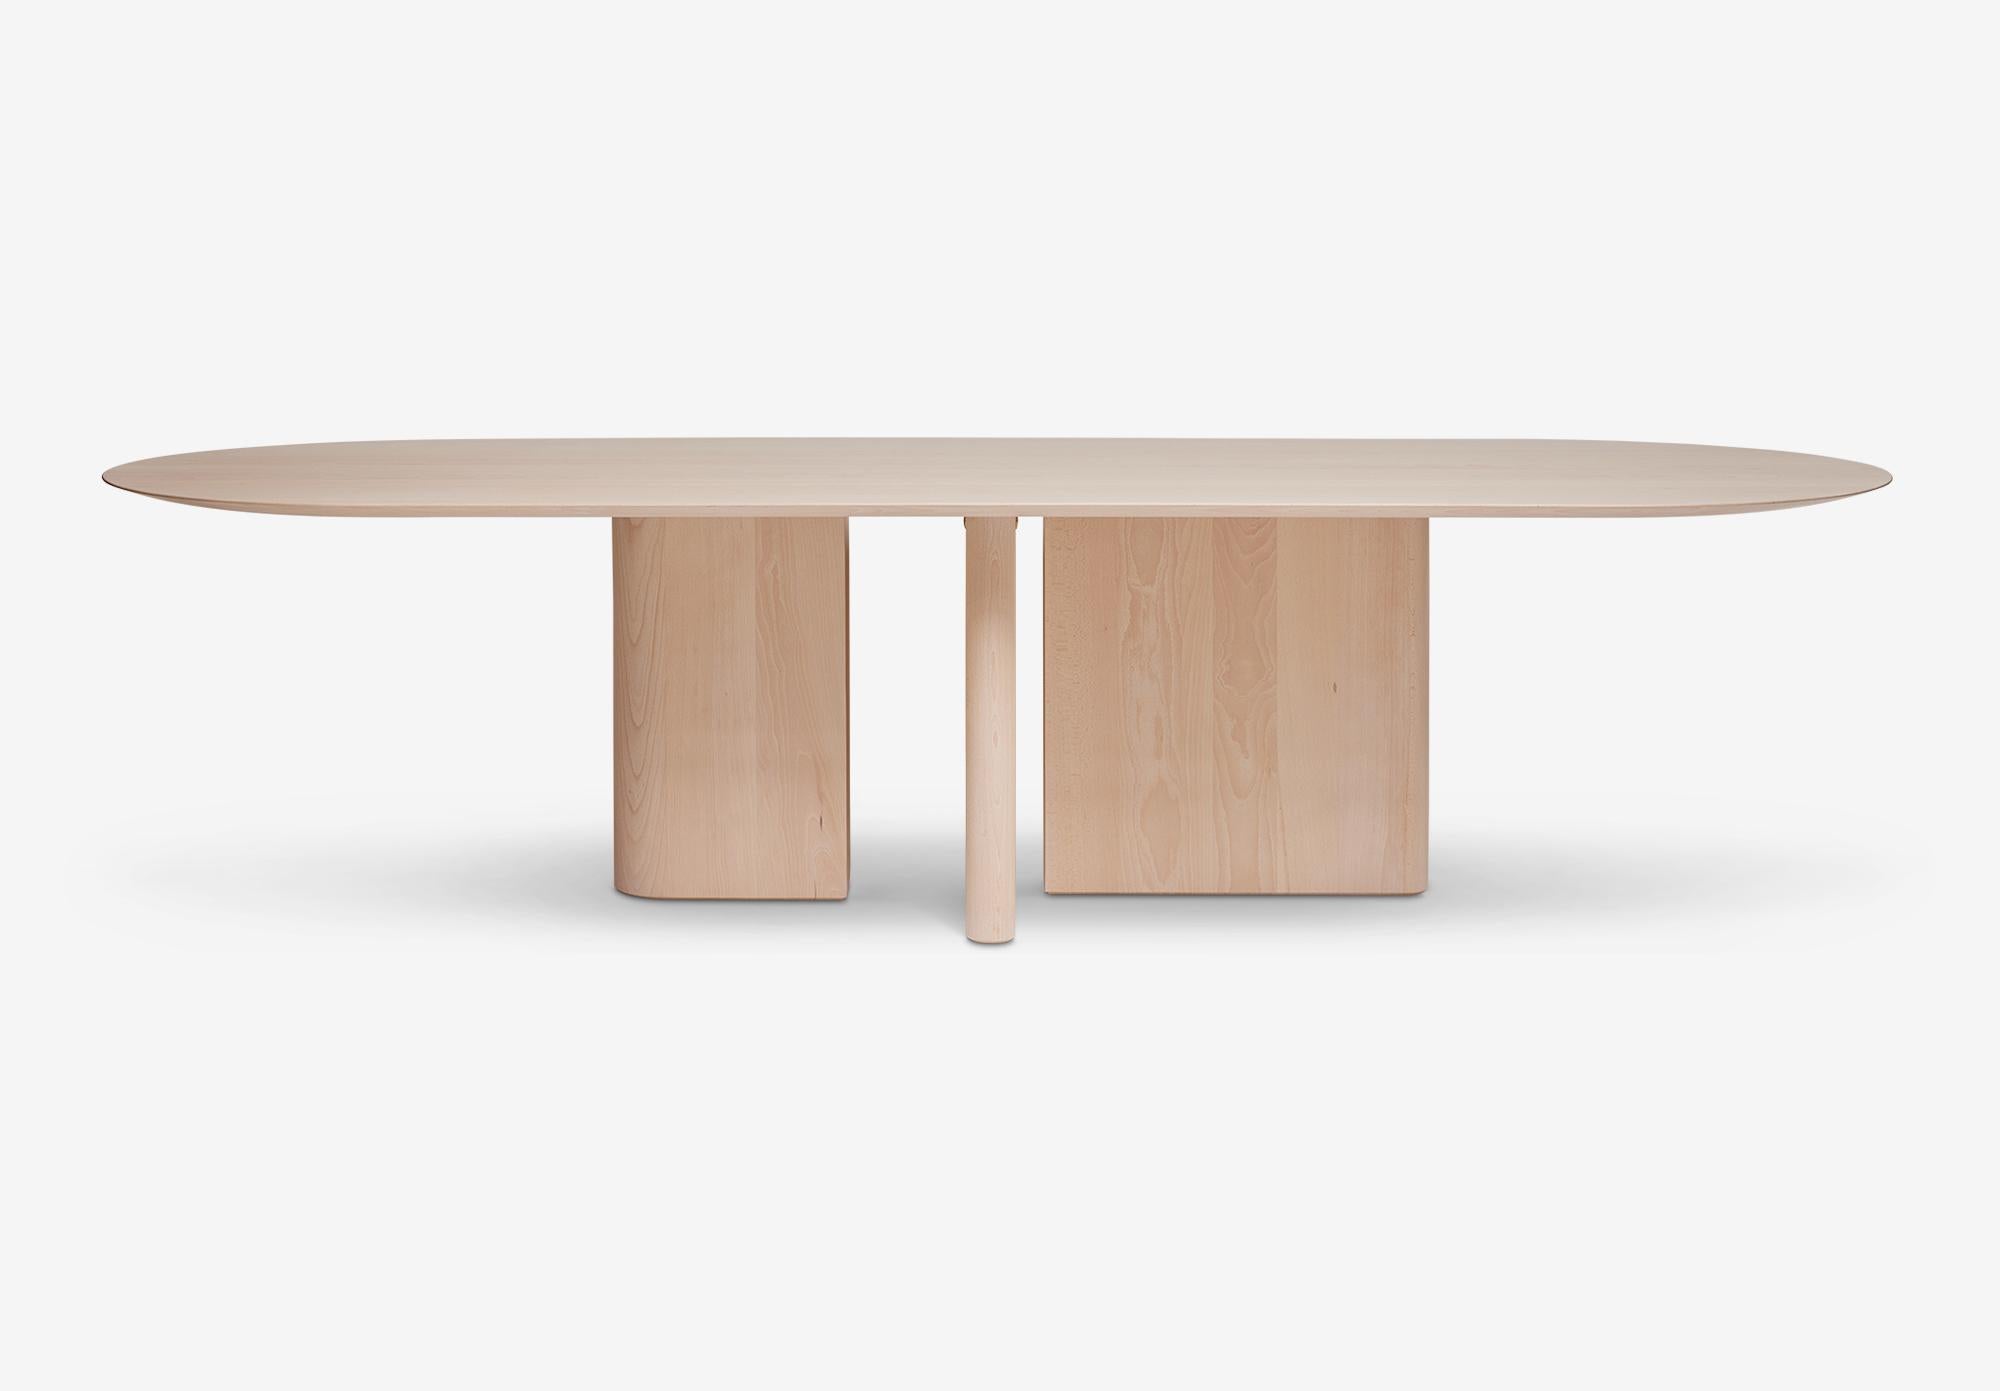 Oiled MG210 Dining Table in Danish beech by Malte Gormsen design by Norm Architects For Sale